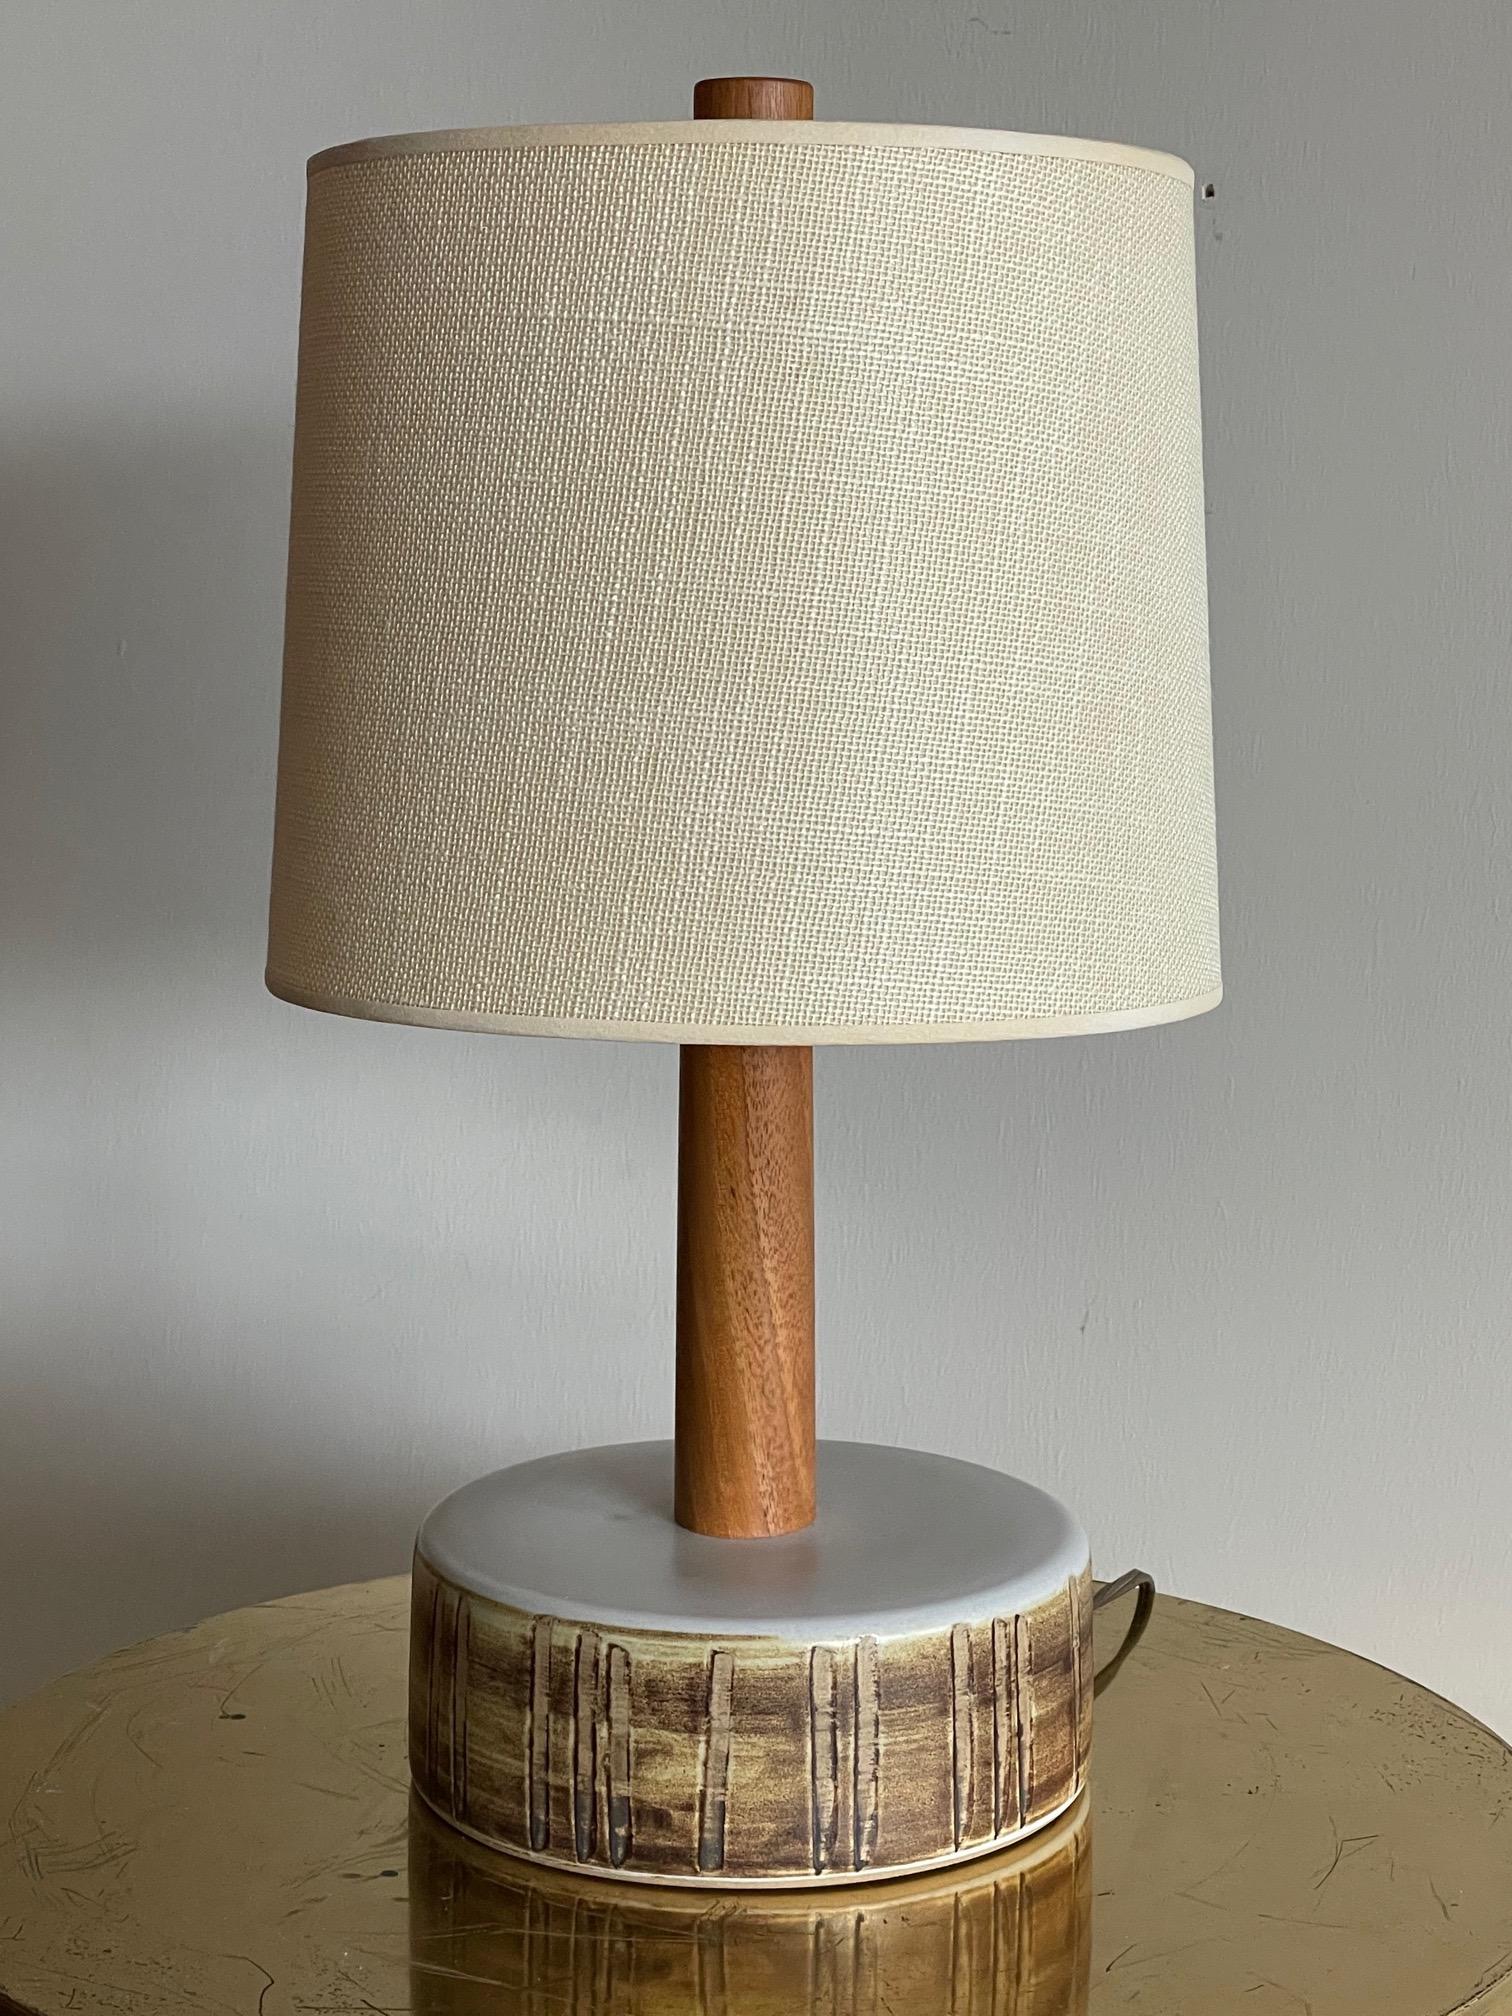 An unusual lamp by Marshall Studios/Martz. Decorated base with long walnut stem. Includes original shade/finial.